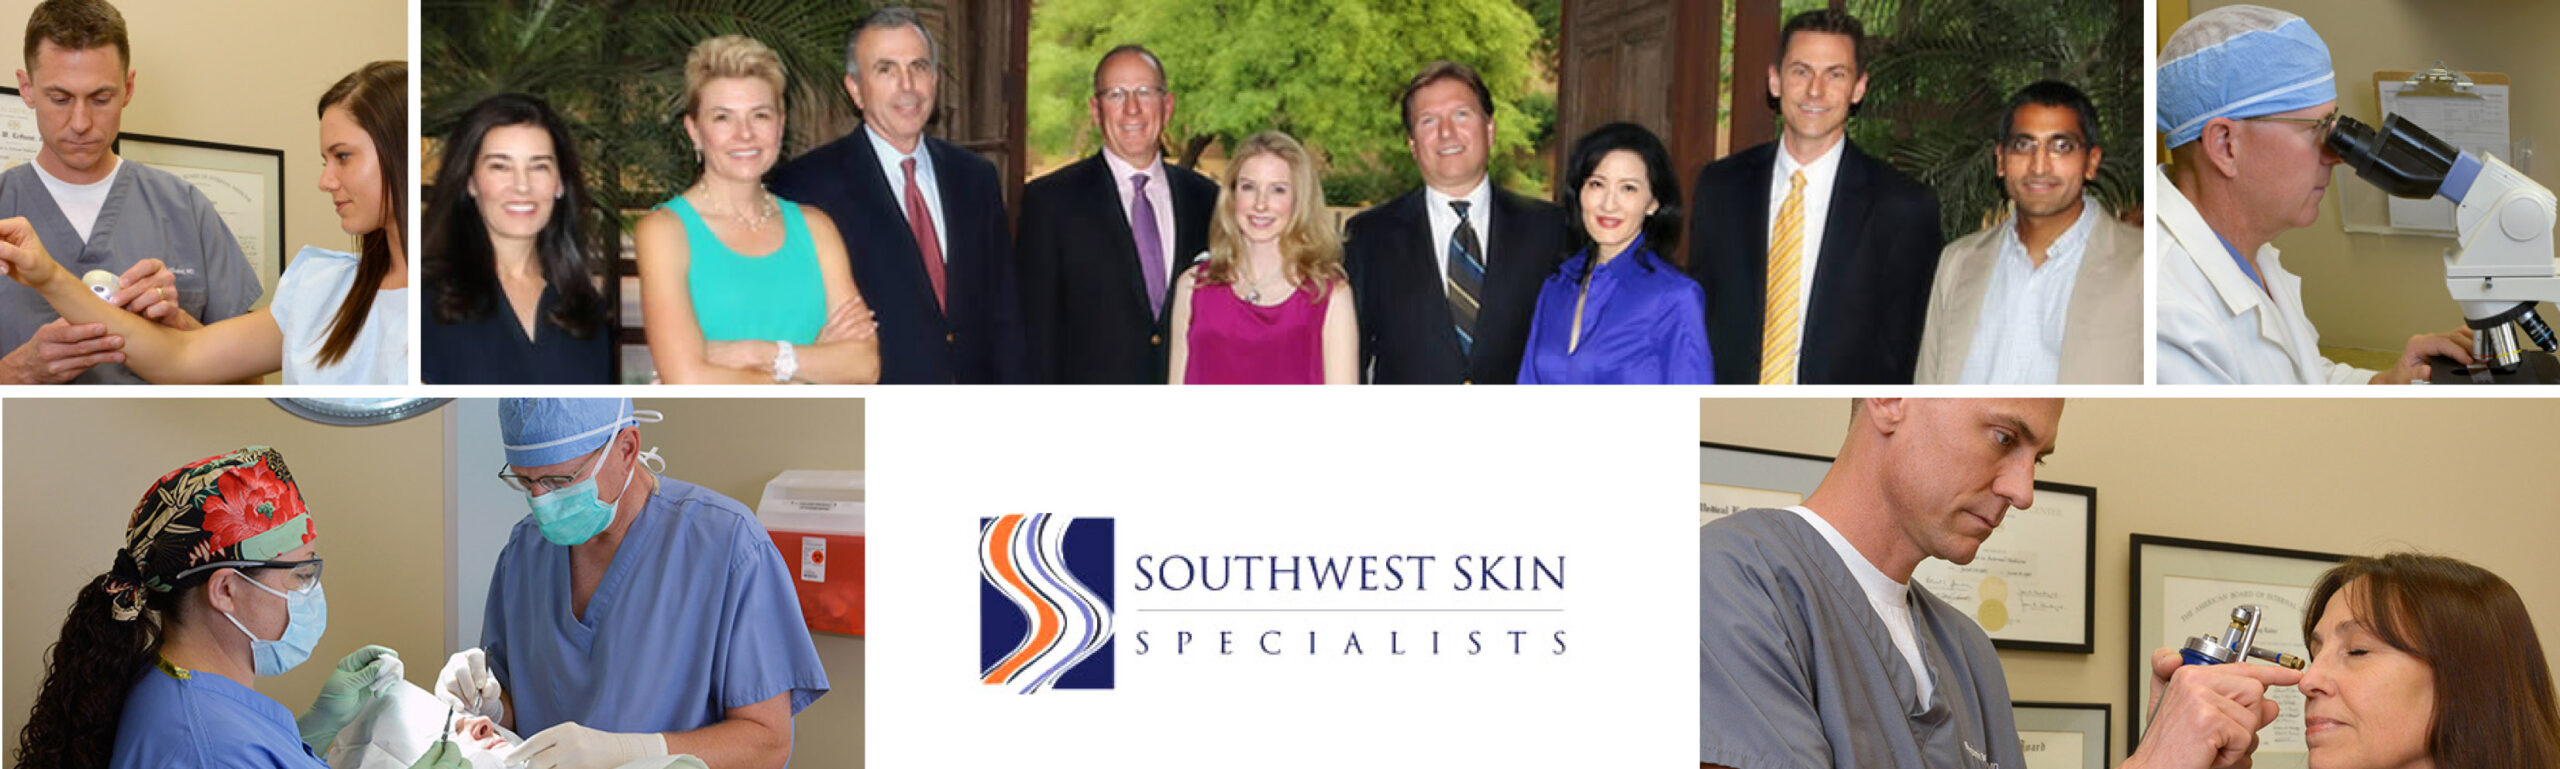 Southwest Skin Specialists is one of the best!